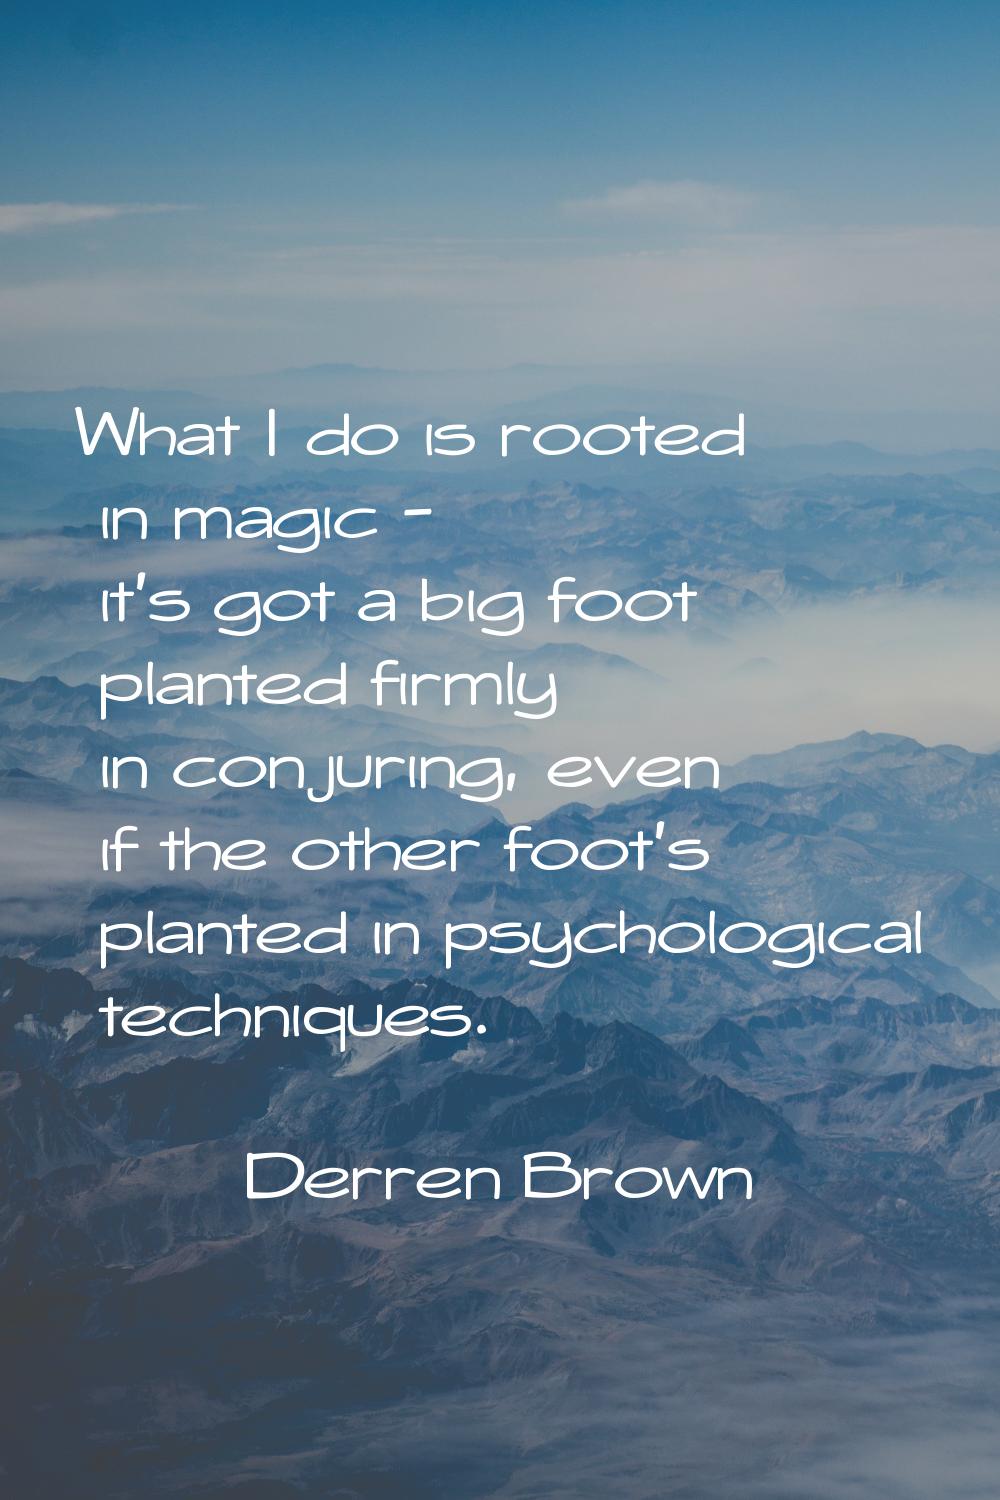 What I do is rooted in magic - it's got a big foot planted firmly in conjuring, even if the other f